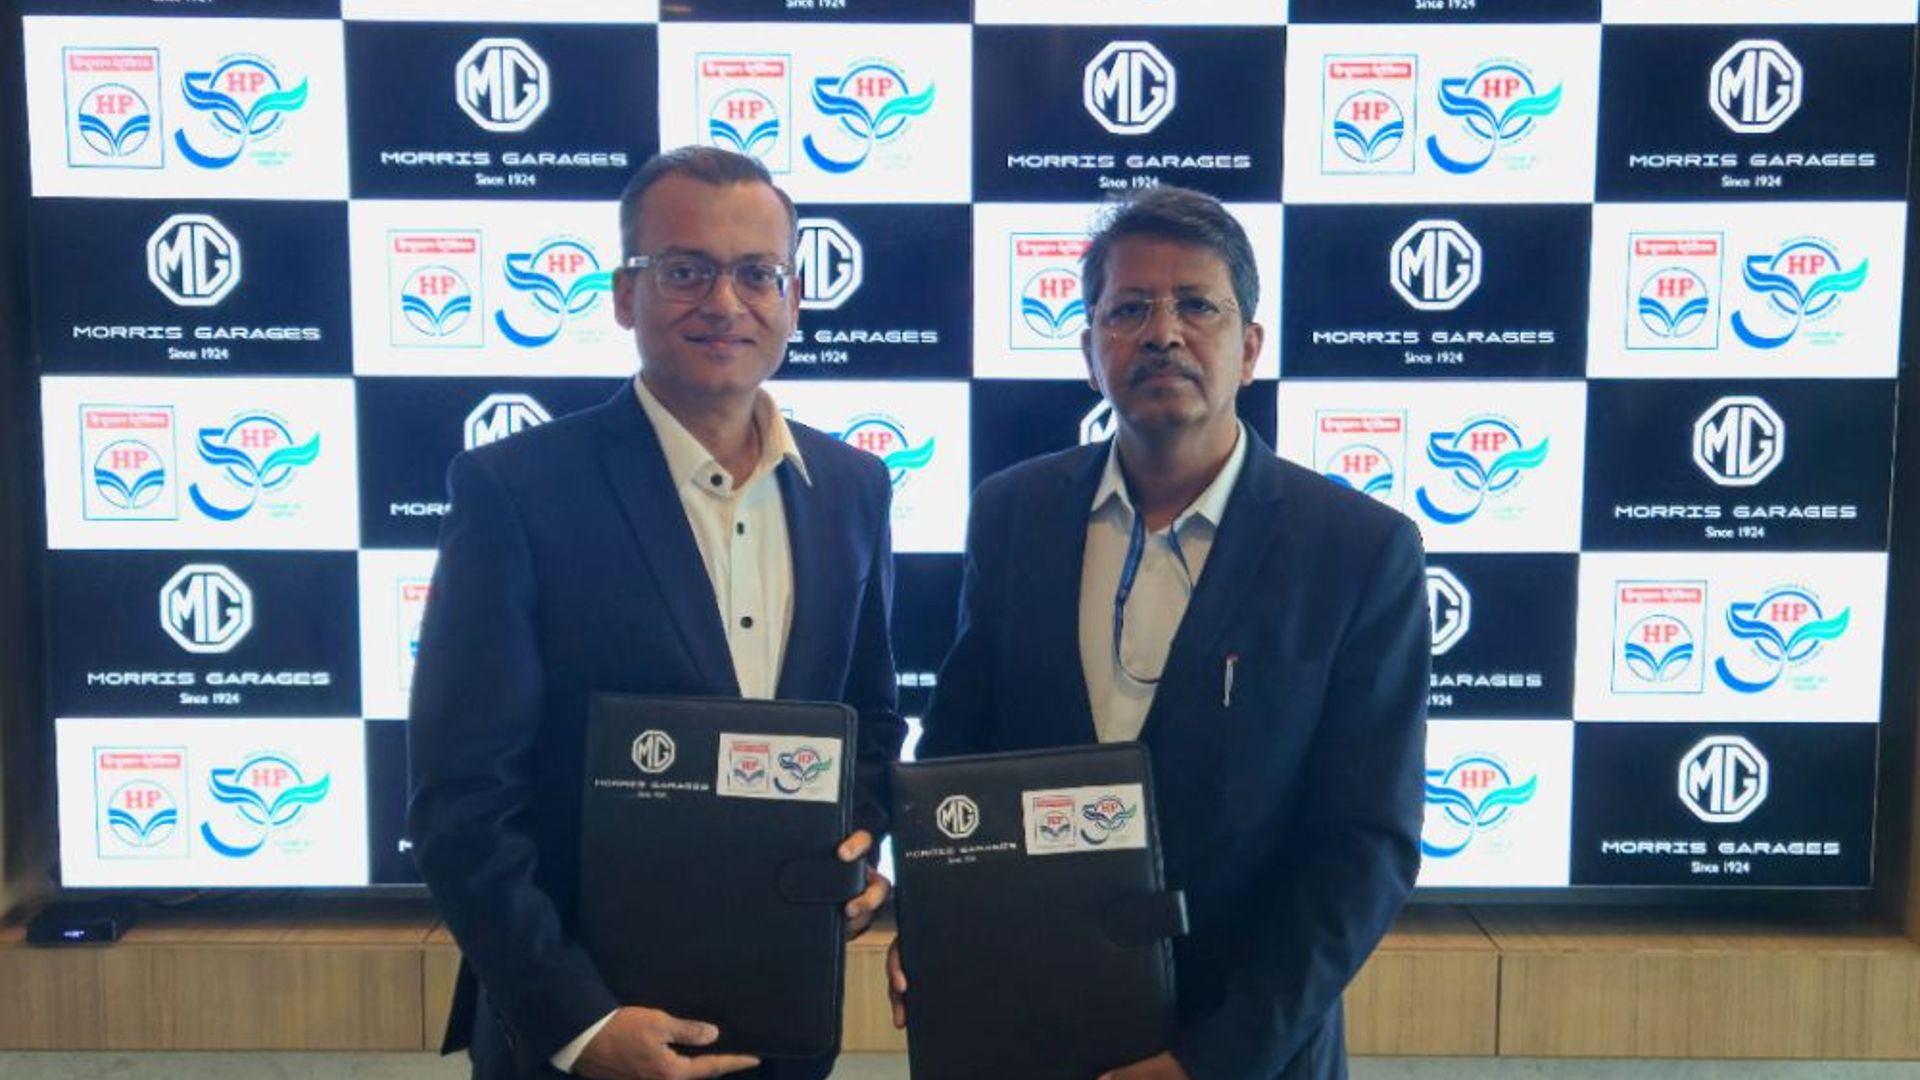 MG and HPCL collaboration for EV infrastructure expansion (Source: Autocar India)